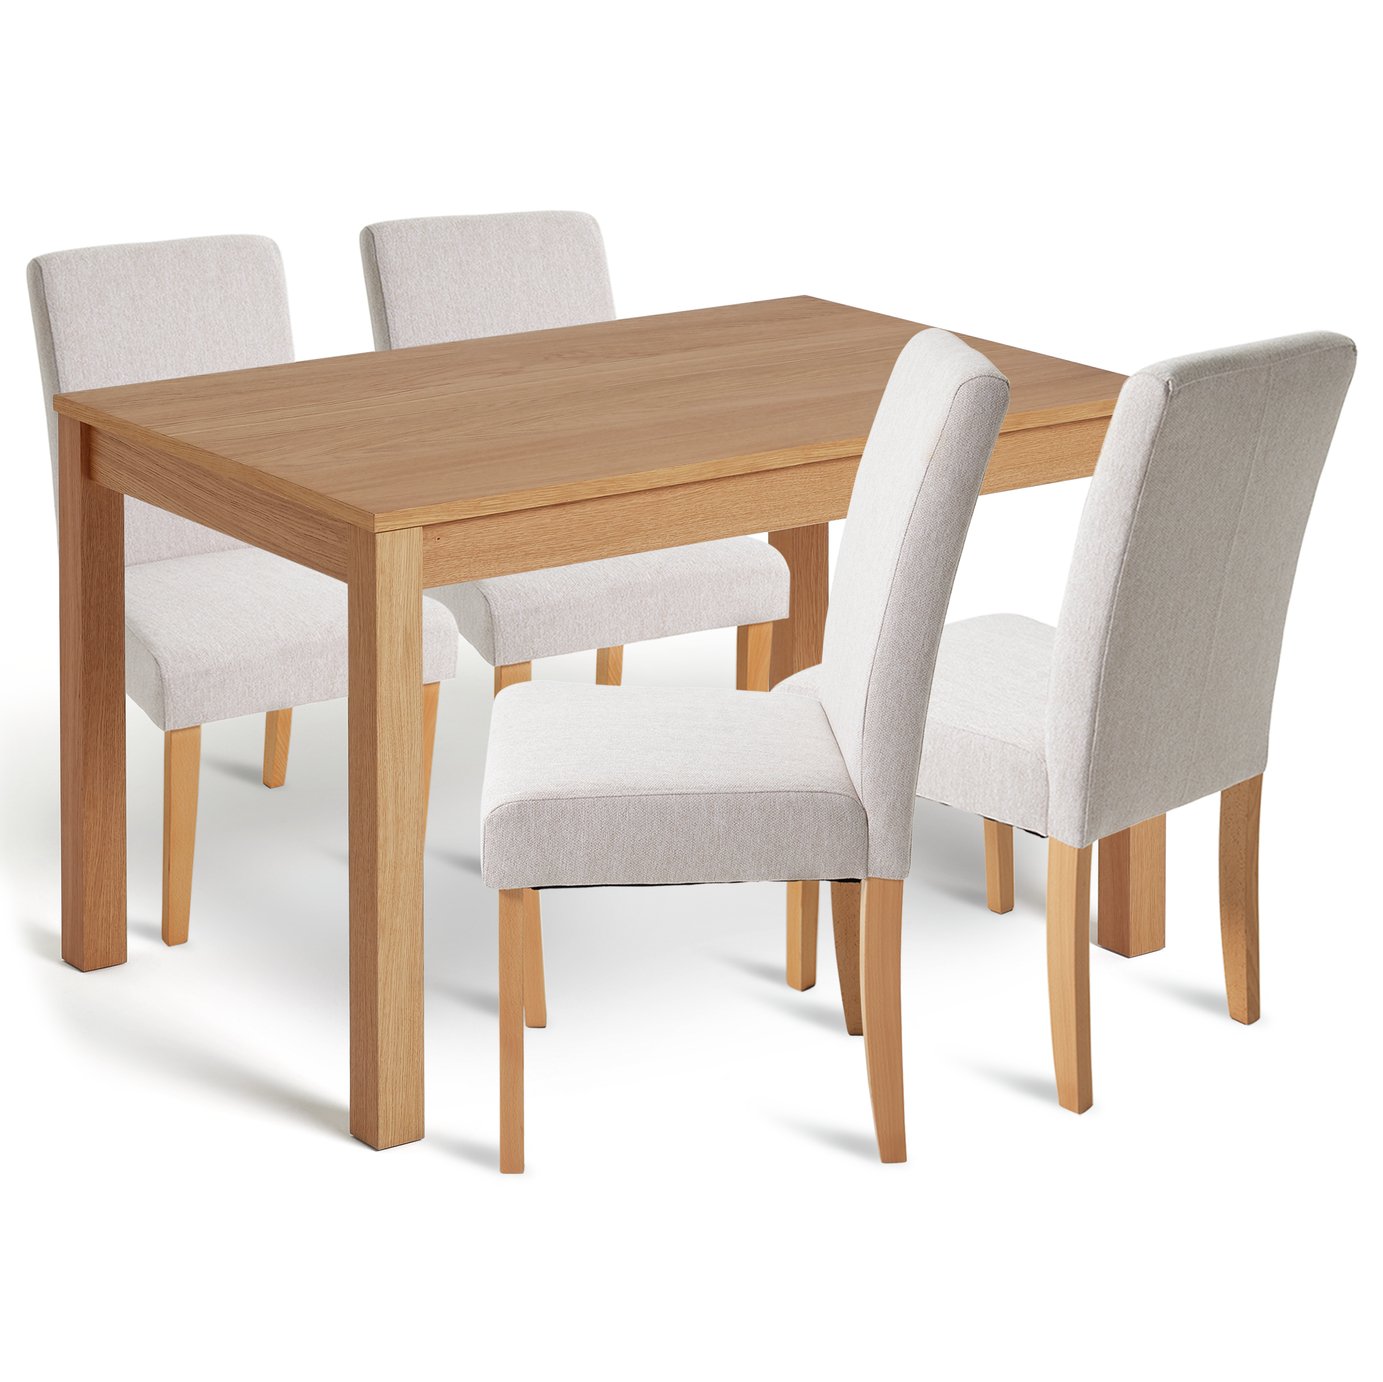 Habitat Clifton Wood Dining Table & 4 Cream Chairs